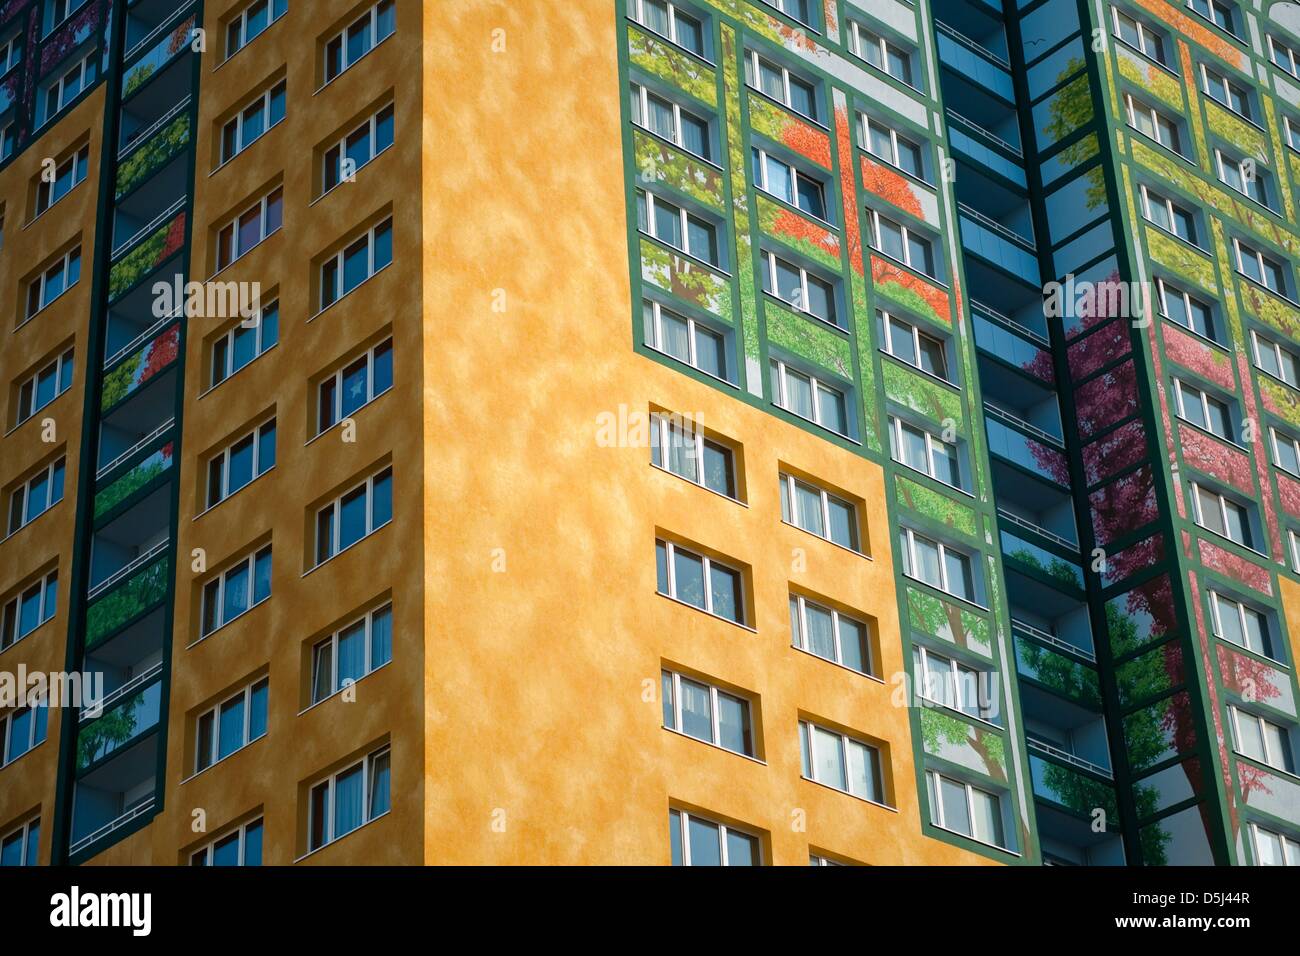 View of the apartment high rise 'Flower Tower' at Allee der Kosmonauten 145 in Berlin-Marzahn, Germany, 14 November 2012. According to the housing association Friedenshort, the apartment building 'Flower Power' is currently the highest piece of facade art in Europe. French artist group CiteCreation was responsible for decorating the 54 m high facade. Photo: ROBERT SCHLESINGER Stock Photo